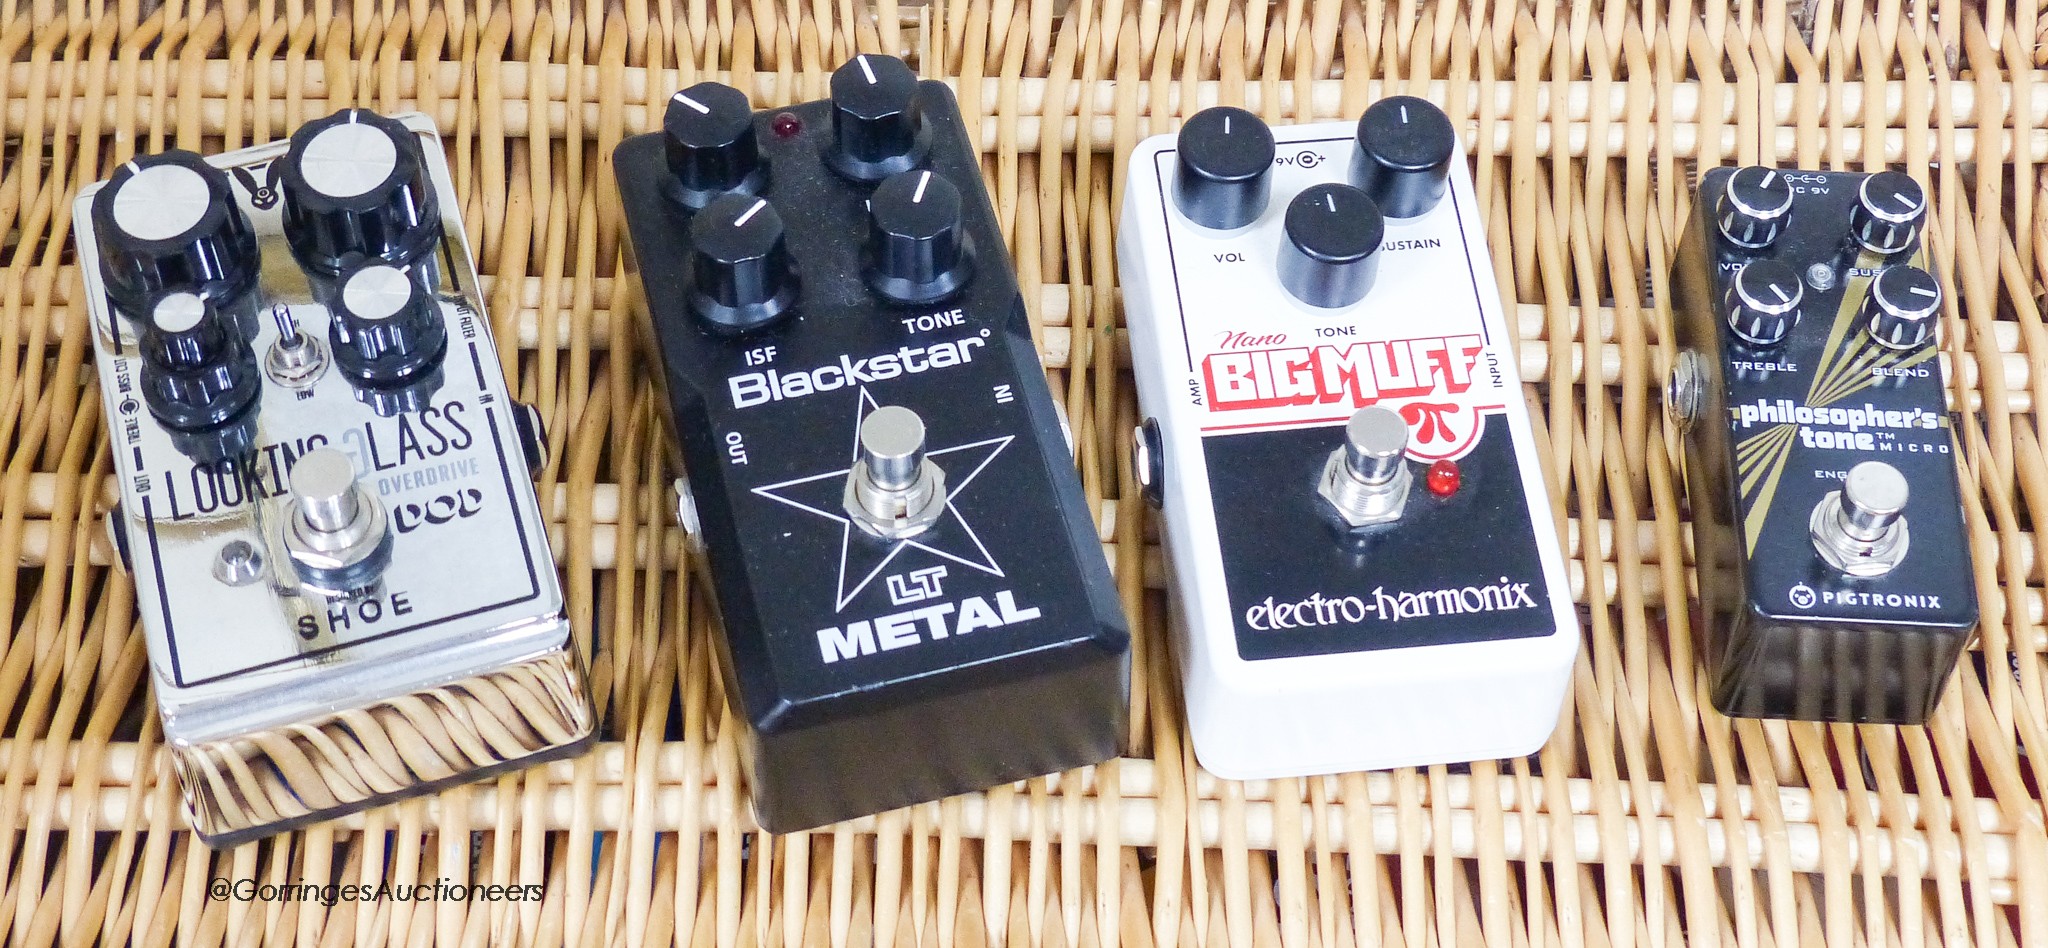 A DOD Looking Glass overdrive pedal, Pigtromx Philosophers tone micro pedal, Nano big muff electro-harmonix pedal and Blackstar LT metal pedal